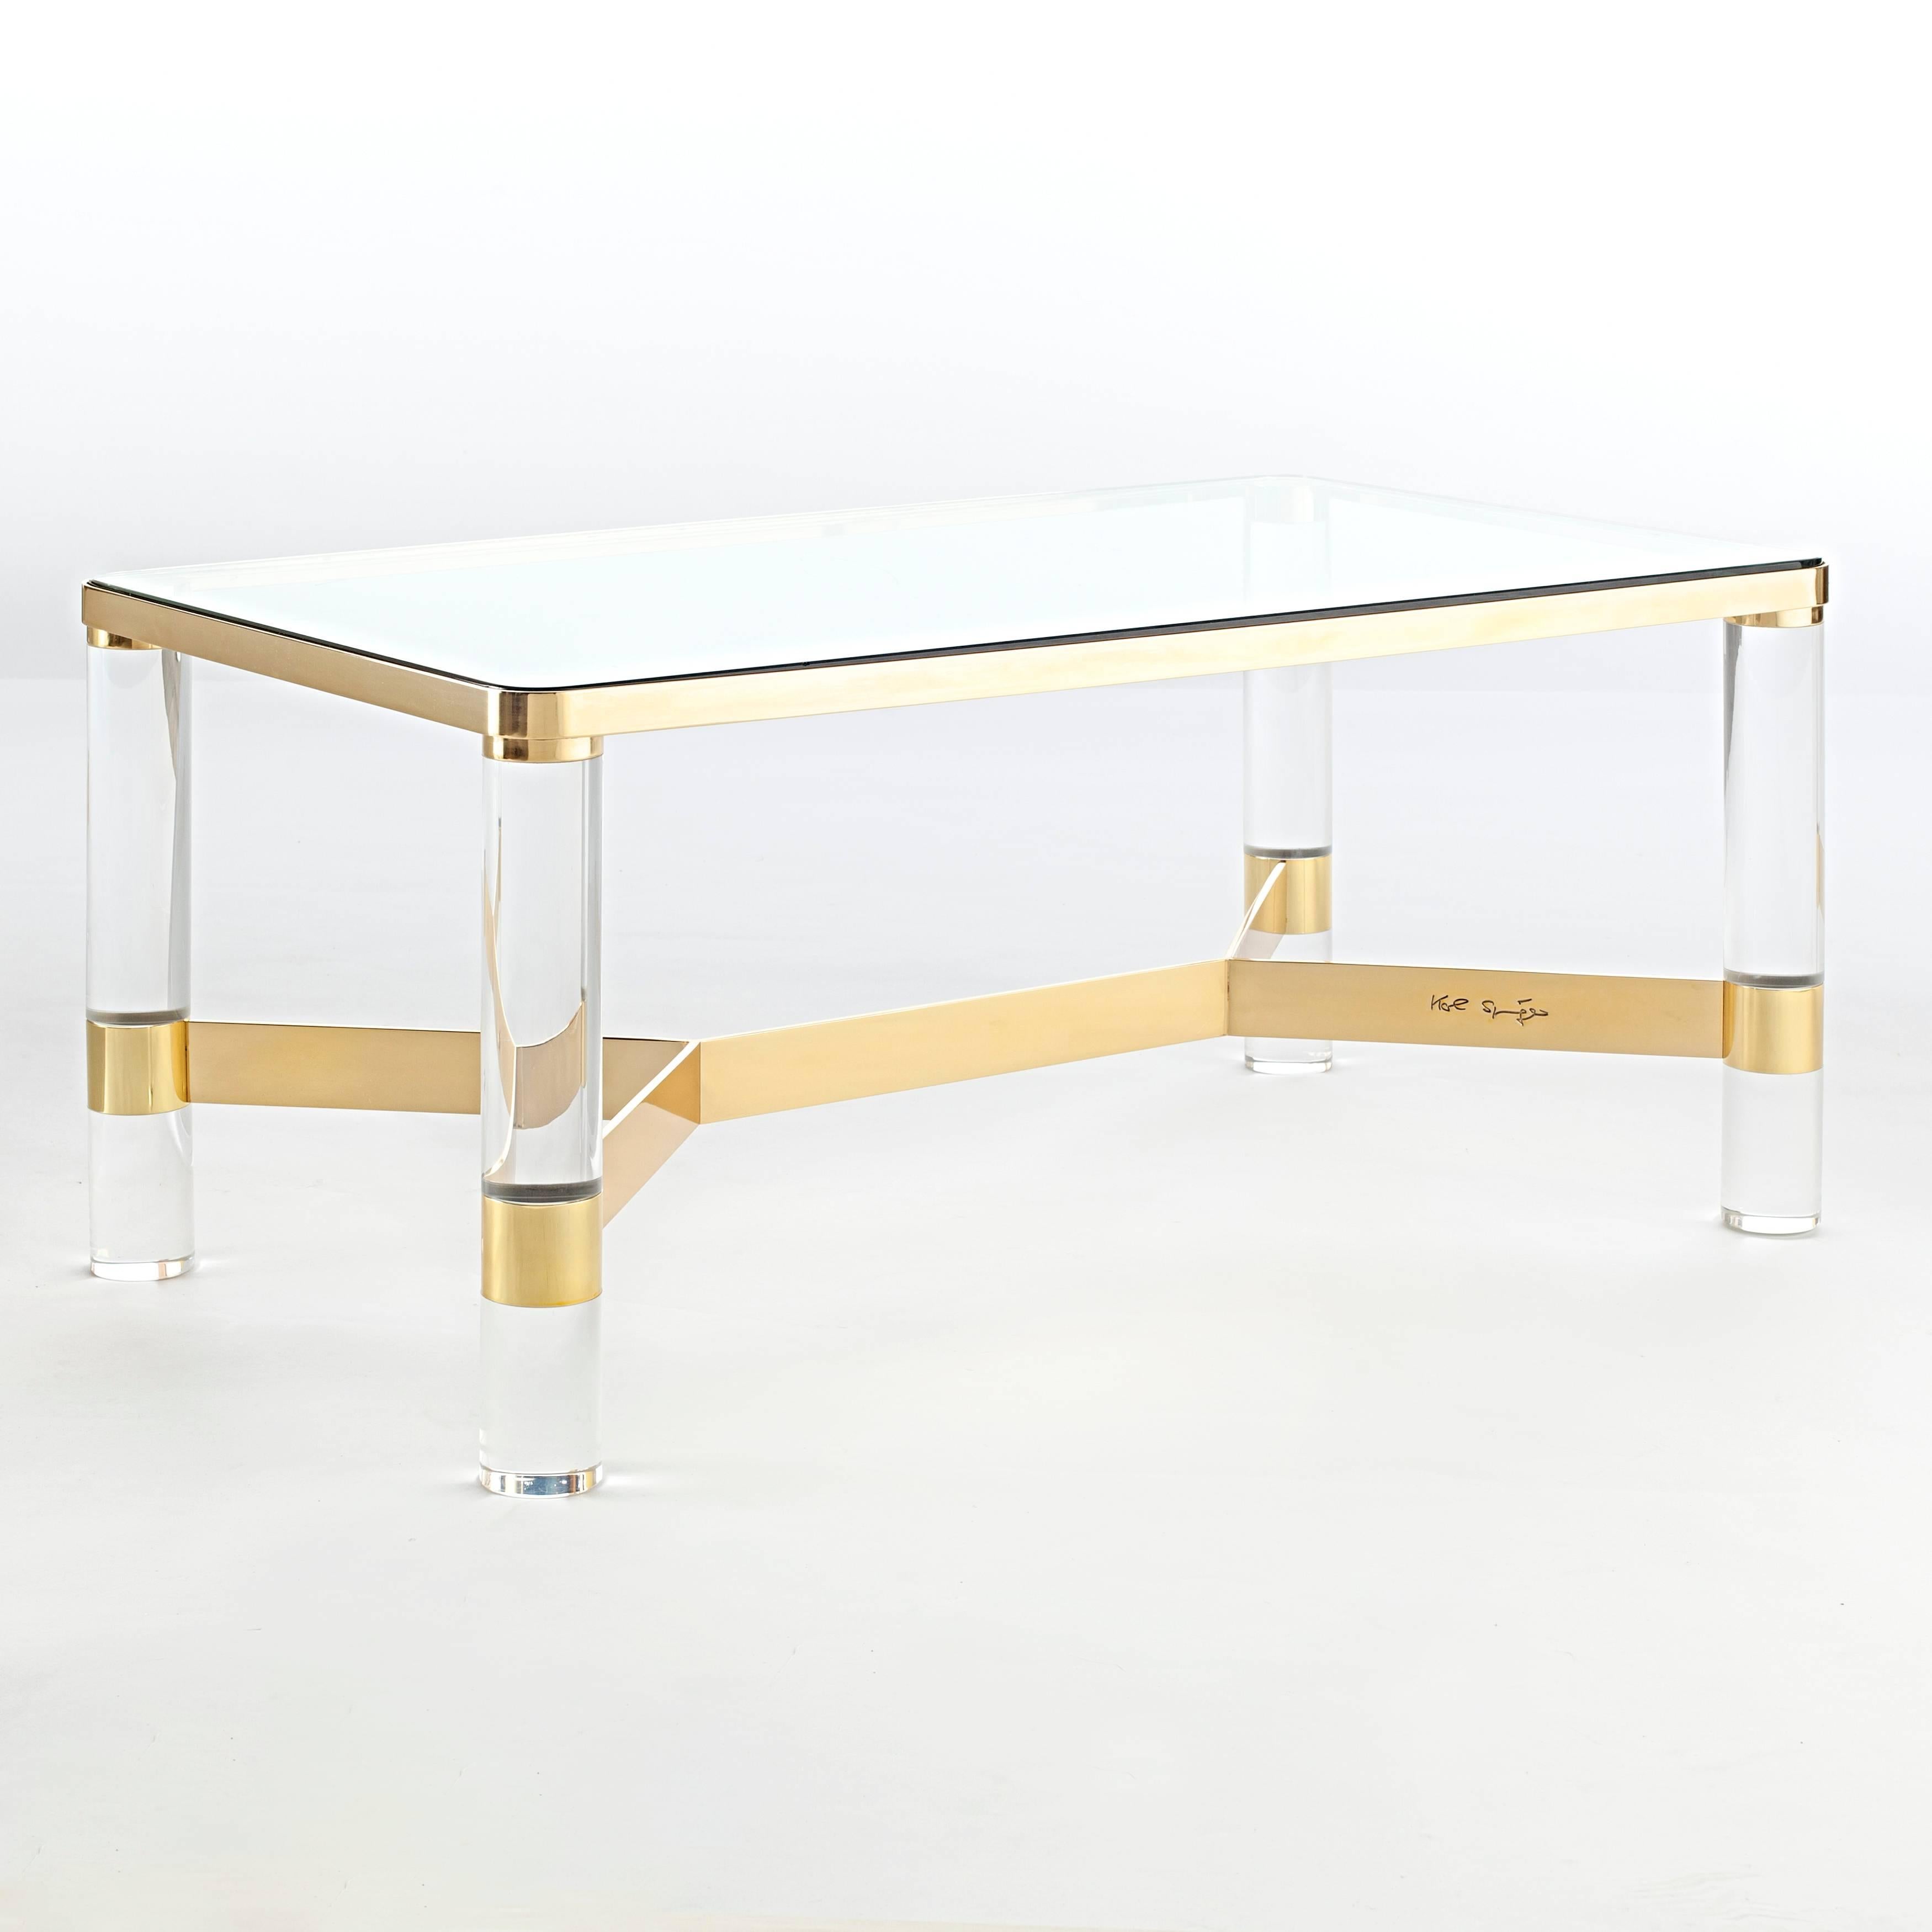 This chic 1980s cocktail table showcases Karl Springer's typical high-quality of construction and attention to detail. The four thick and chunky Lucite legs are held together by a four-arm stretcher; a brass frame above supports the glass top. The